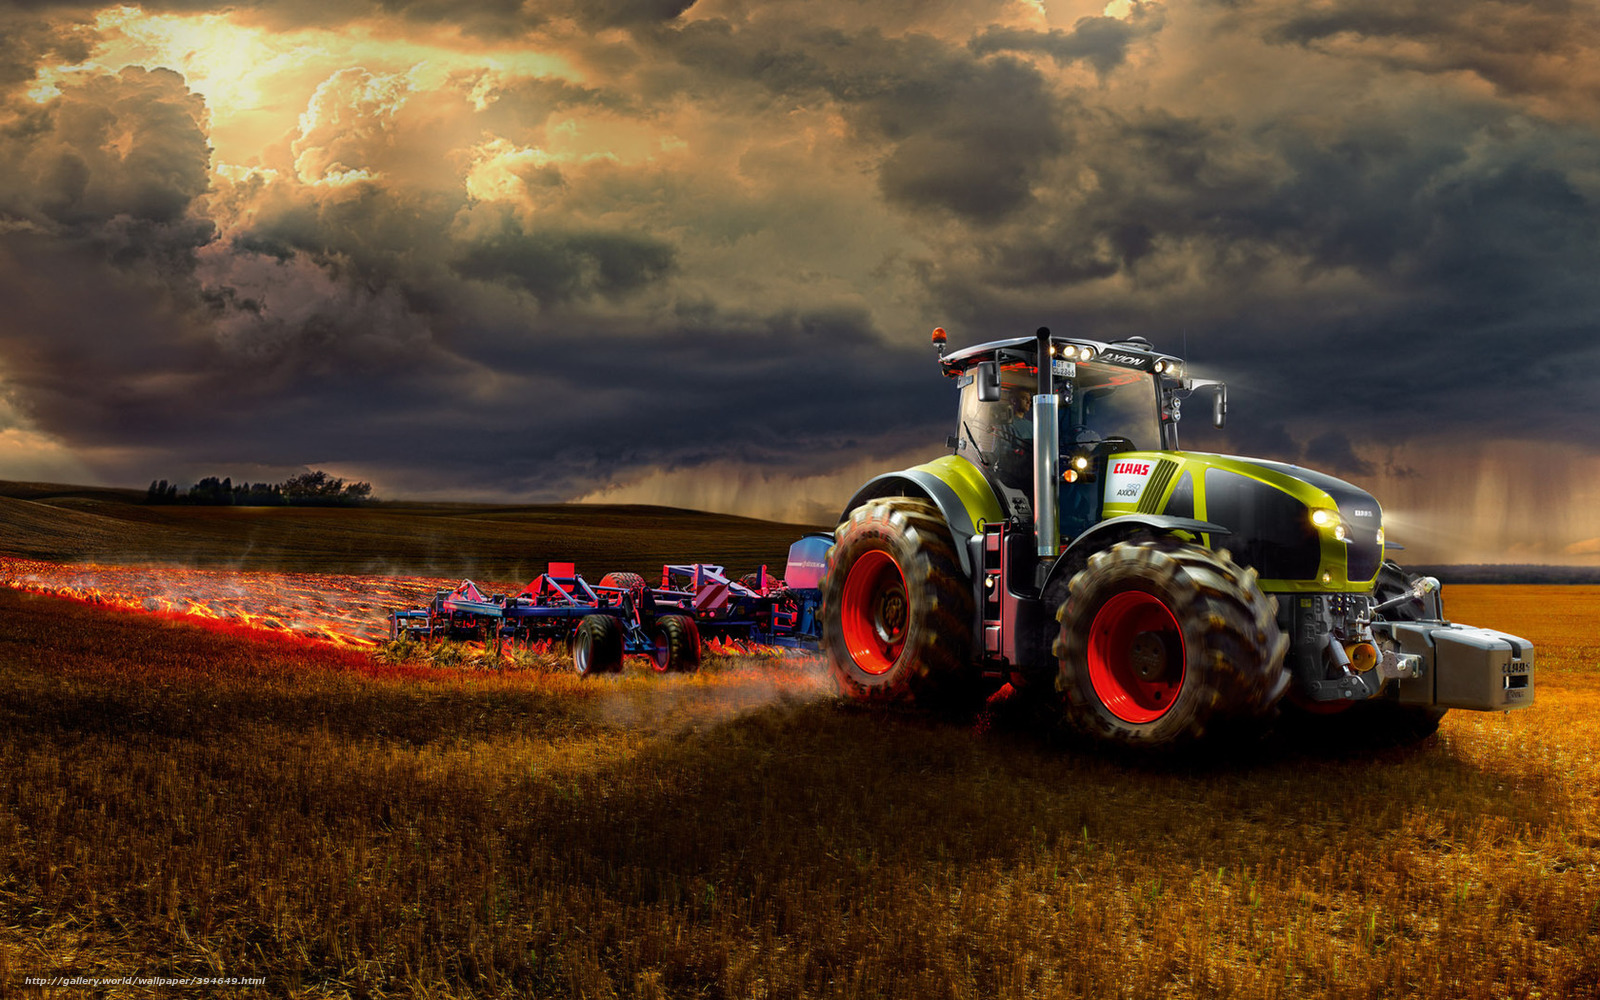  comDownload wallpaper tractor Klaas Other machinery and equipment